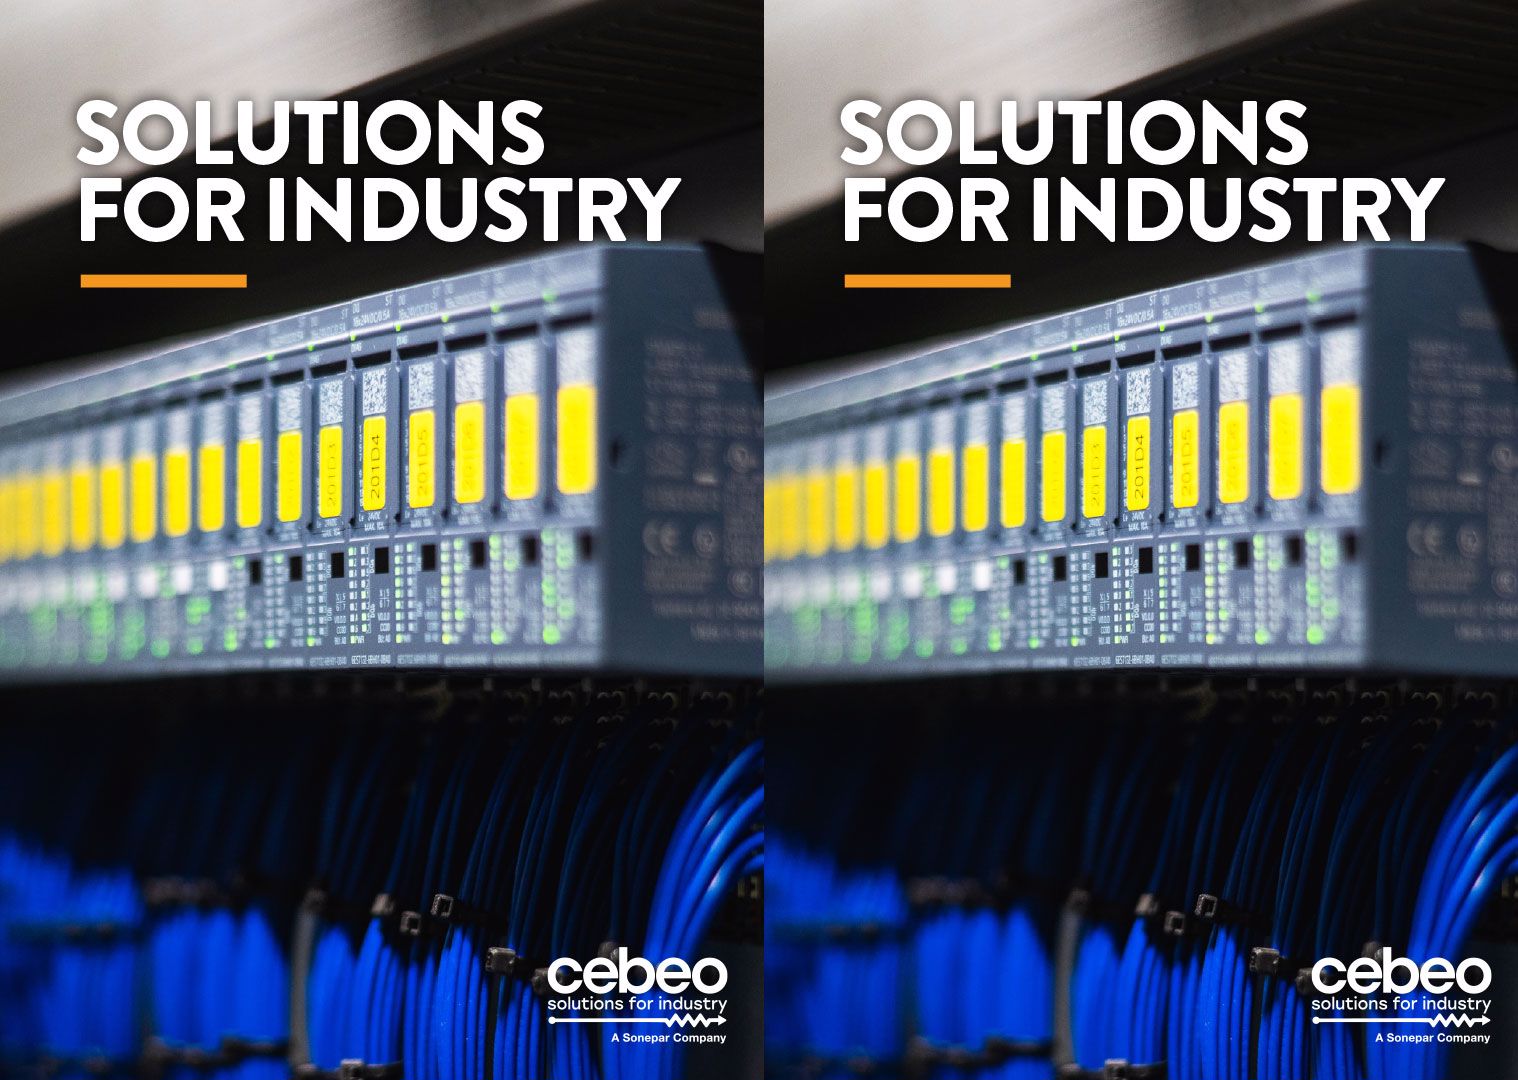 Cebeo Solutions for Industry